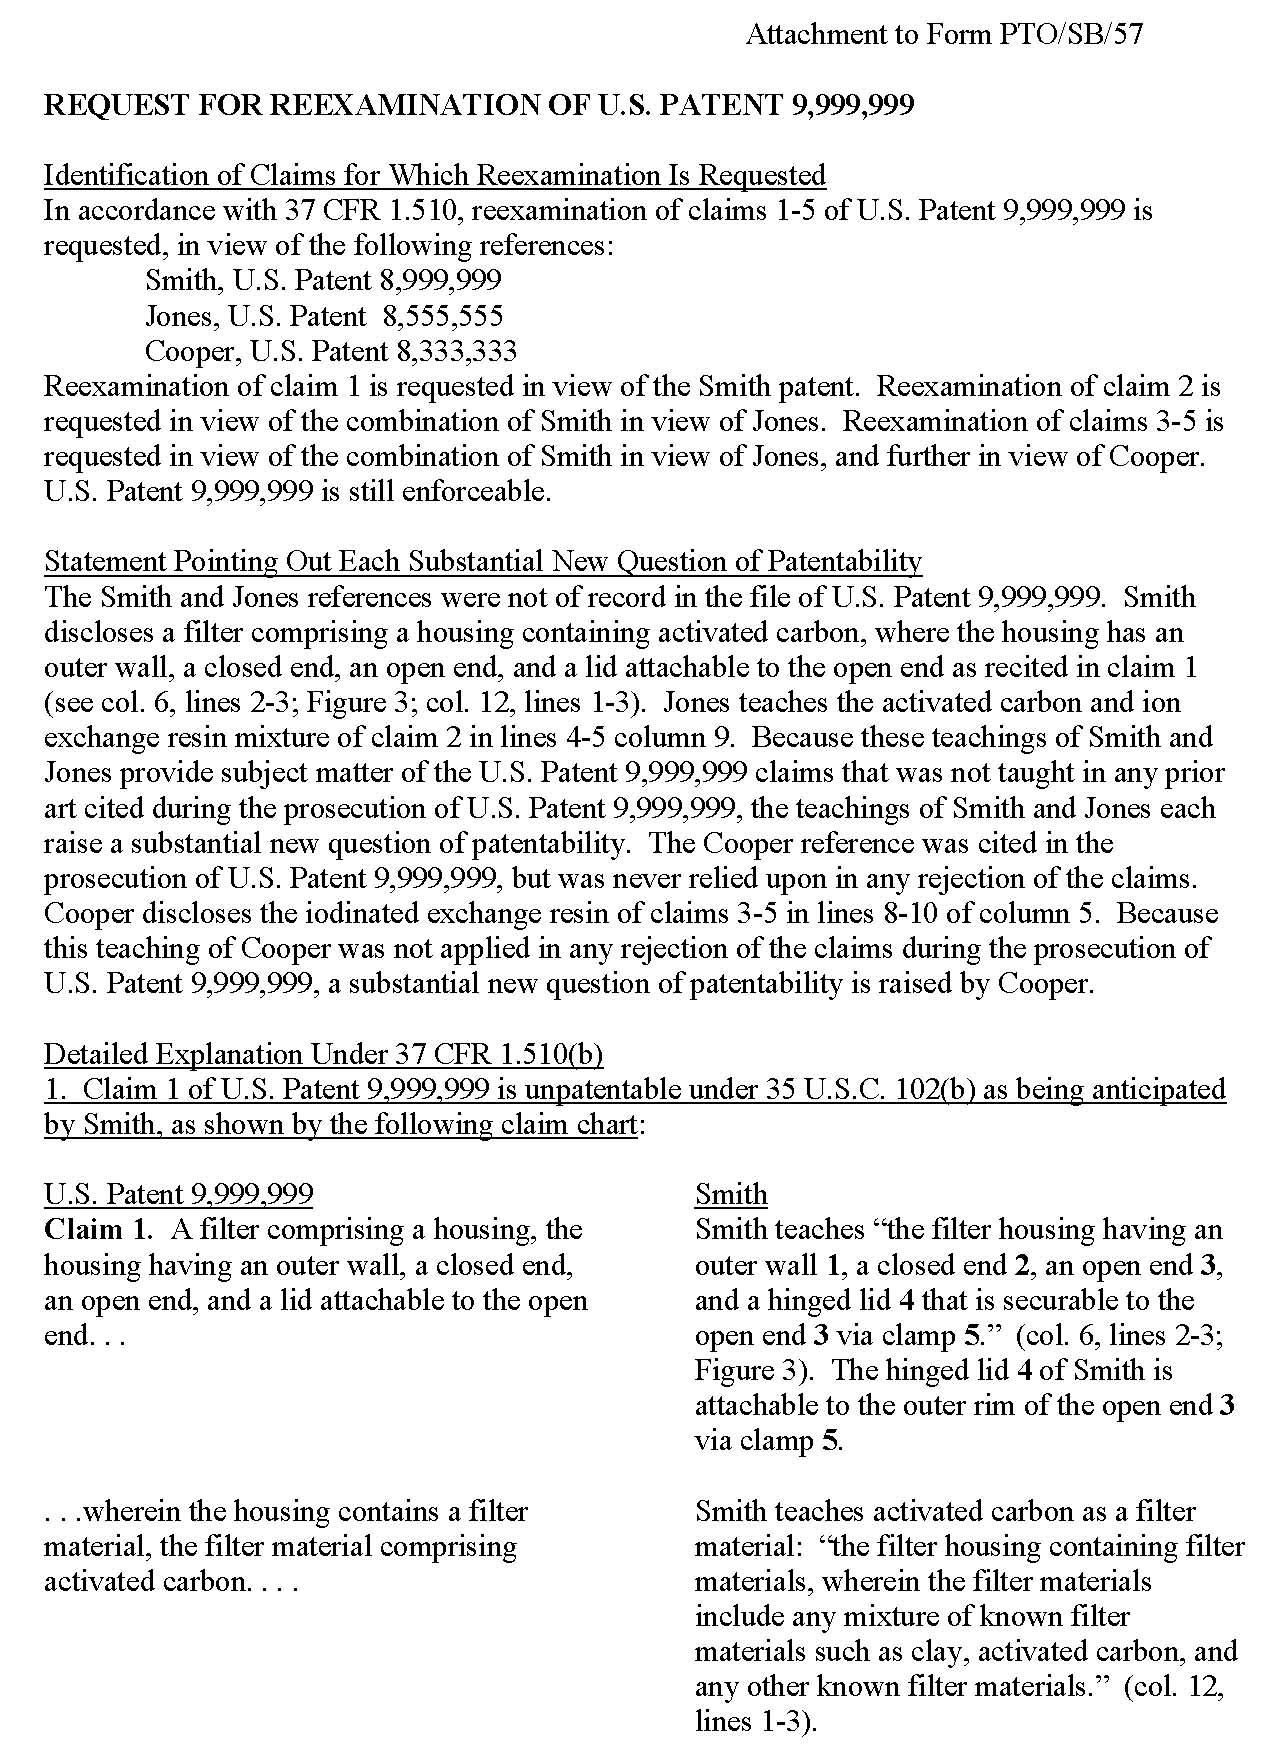 Request for Reexamination of U.S. Patent 9,999,999 (Page 1)